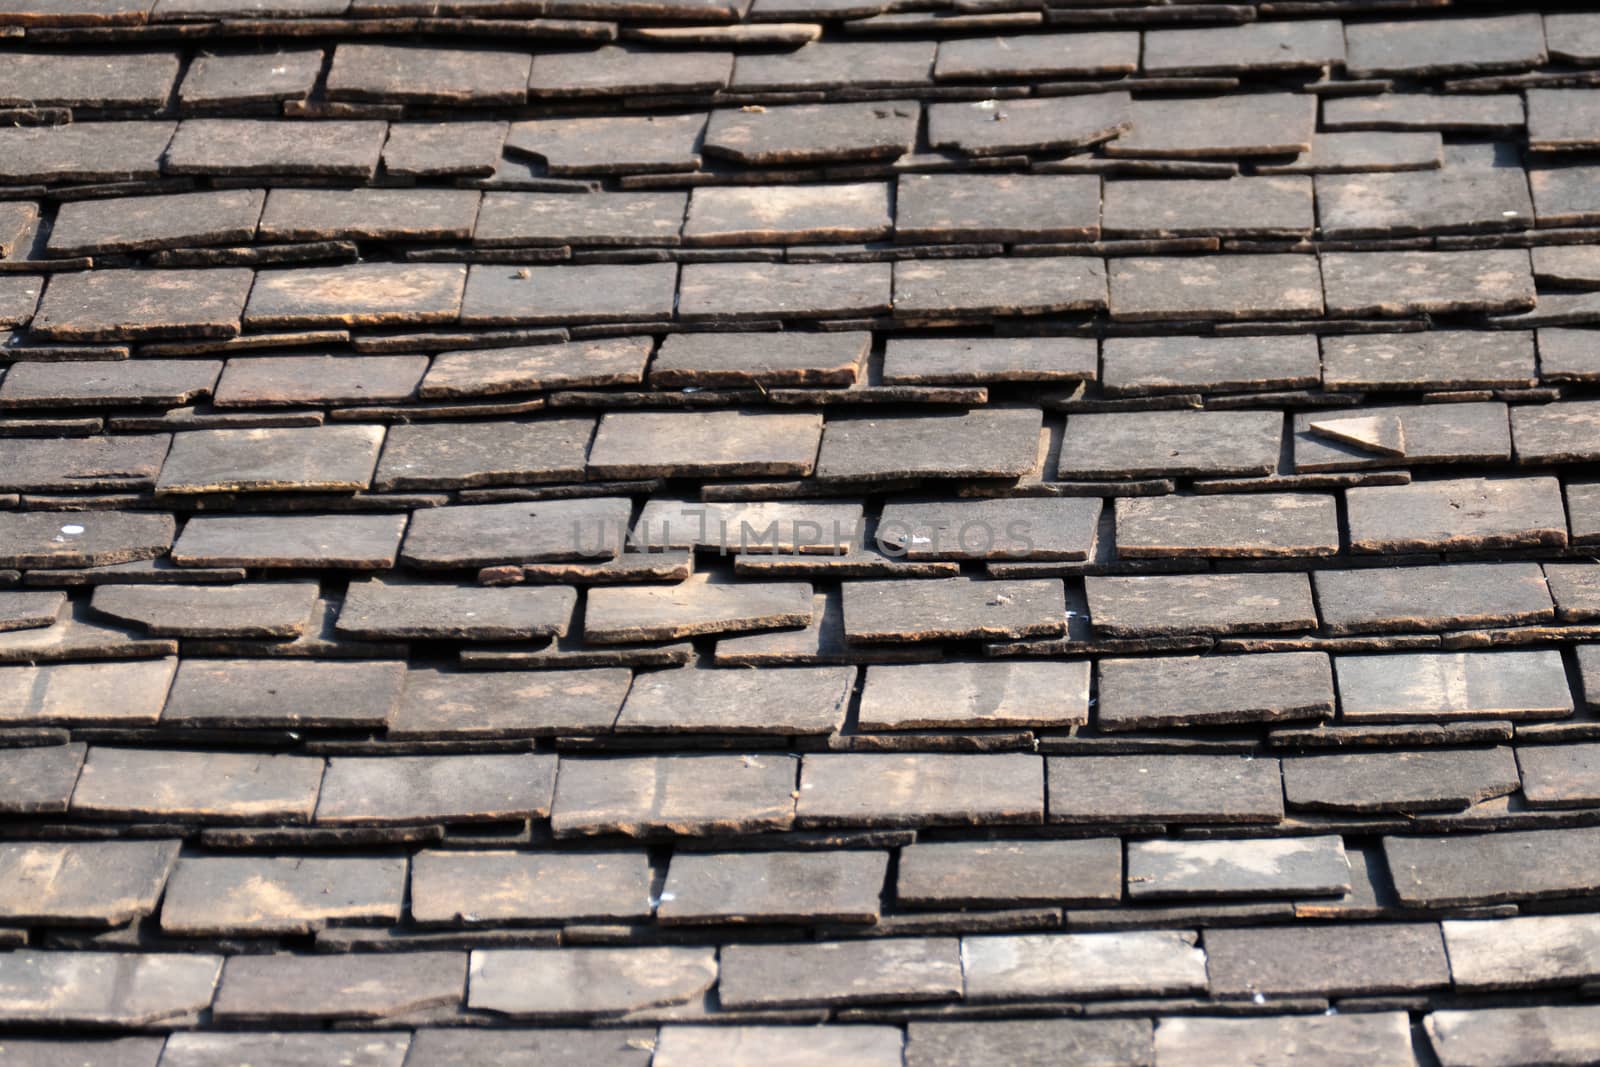 Abstract Detail of Old Slate Roof Tiles, abstract background